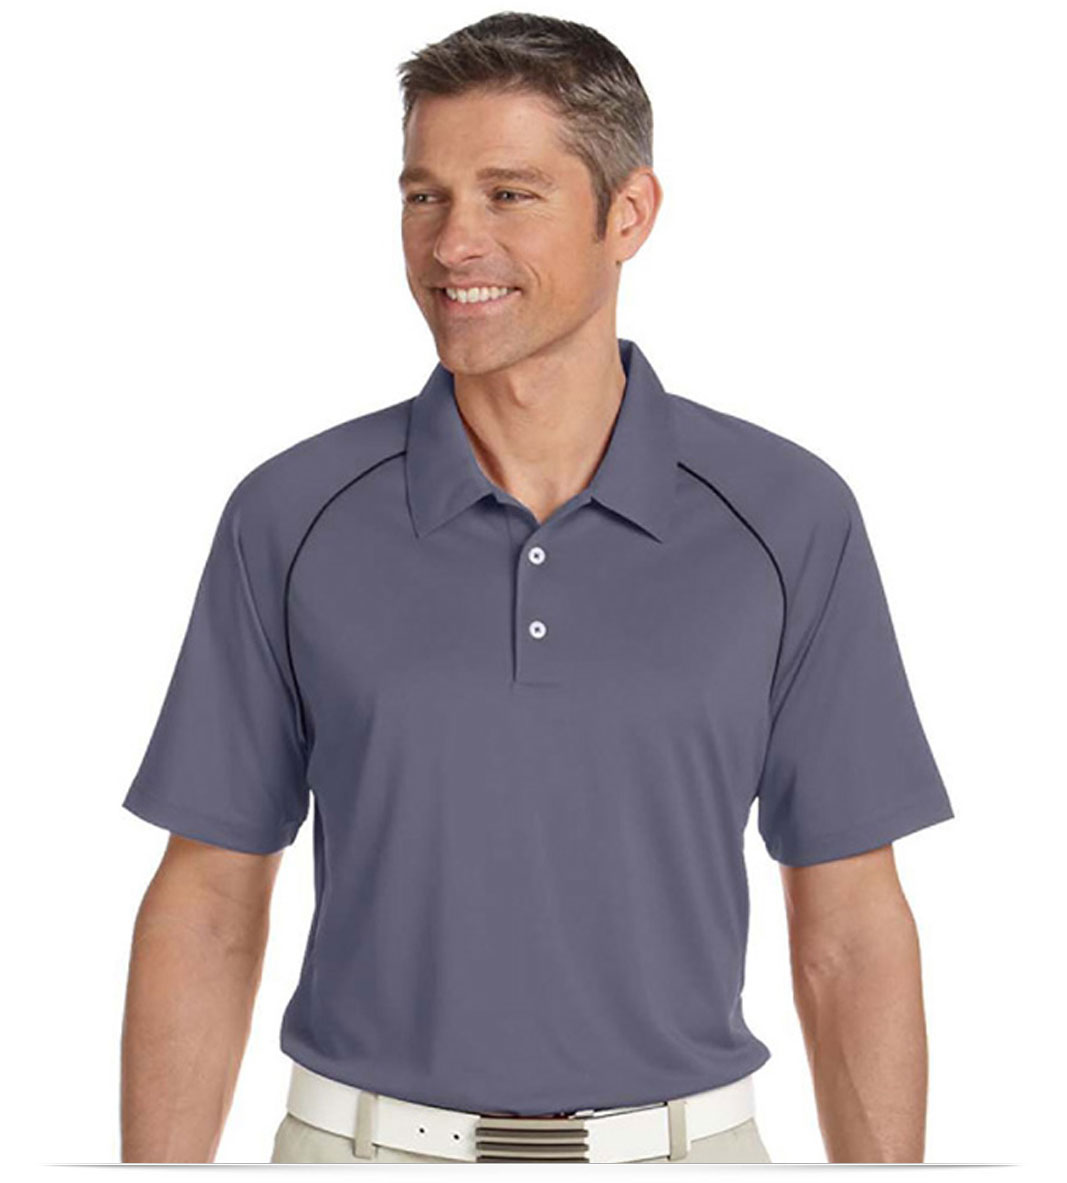 Embroidered Adidas Golf Men’s Piped Polo